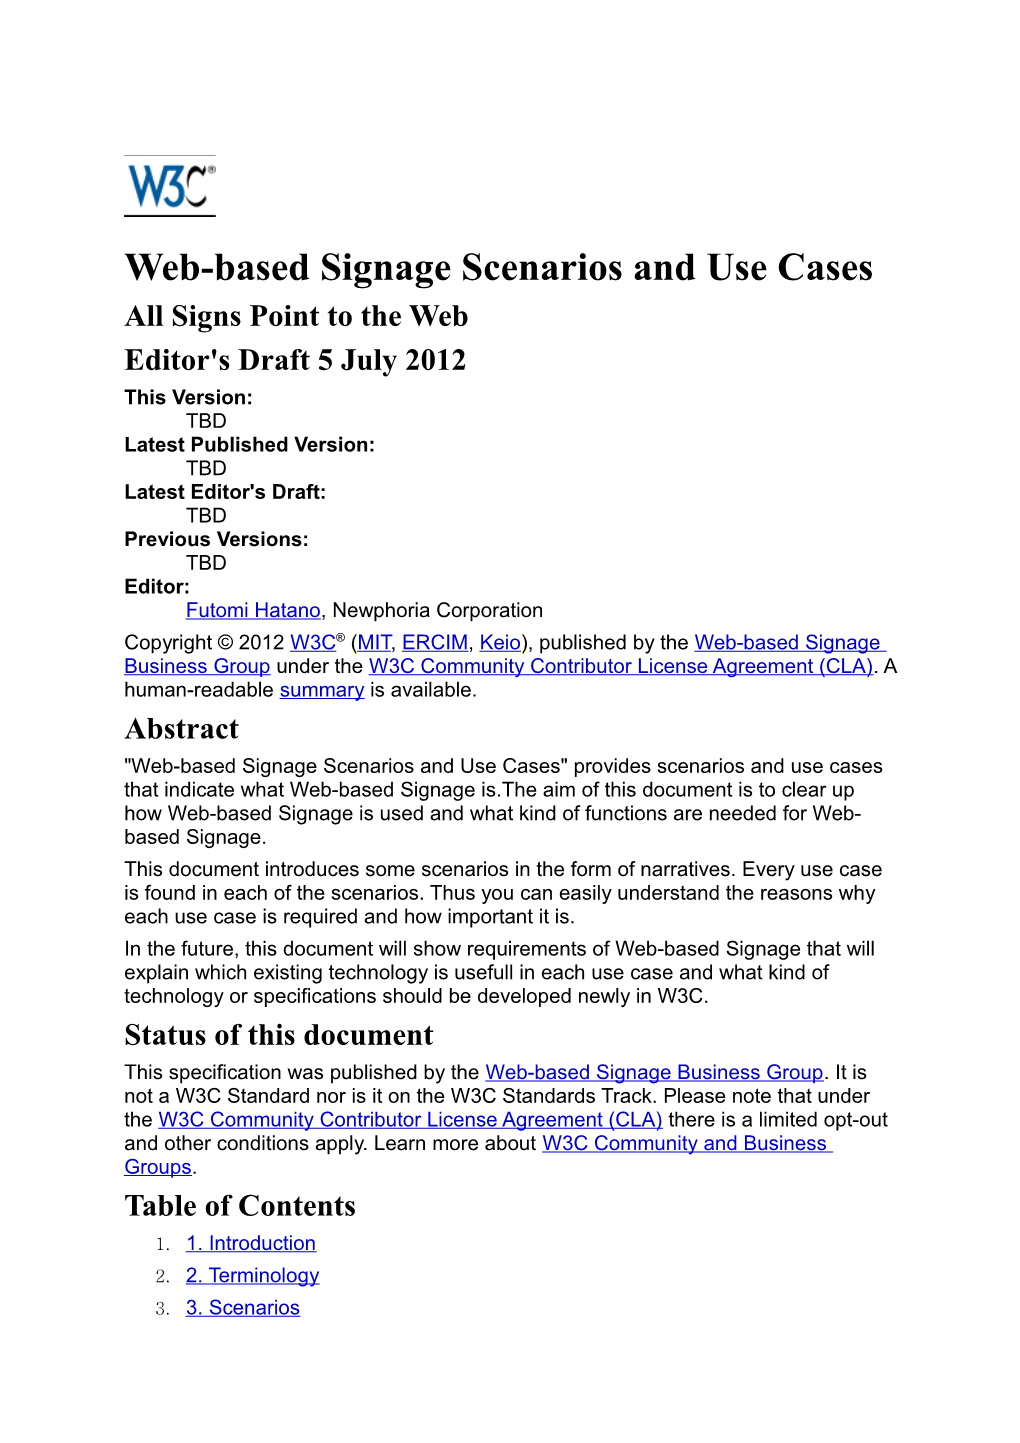 Web-Based Signage Scenarios and Use Cases